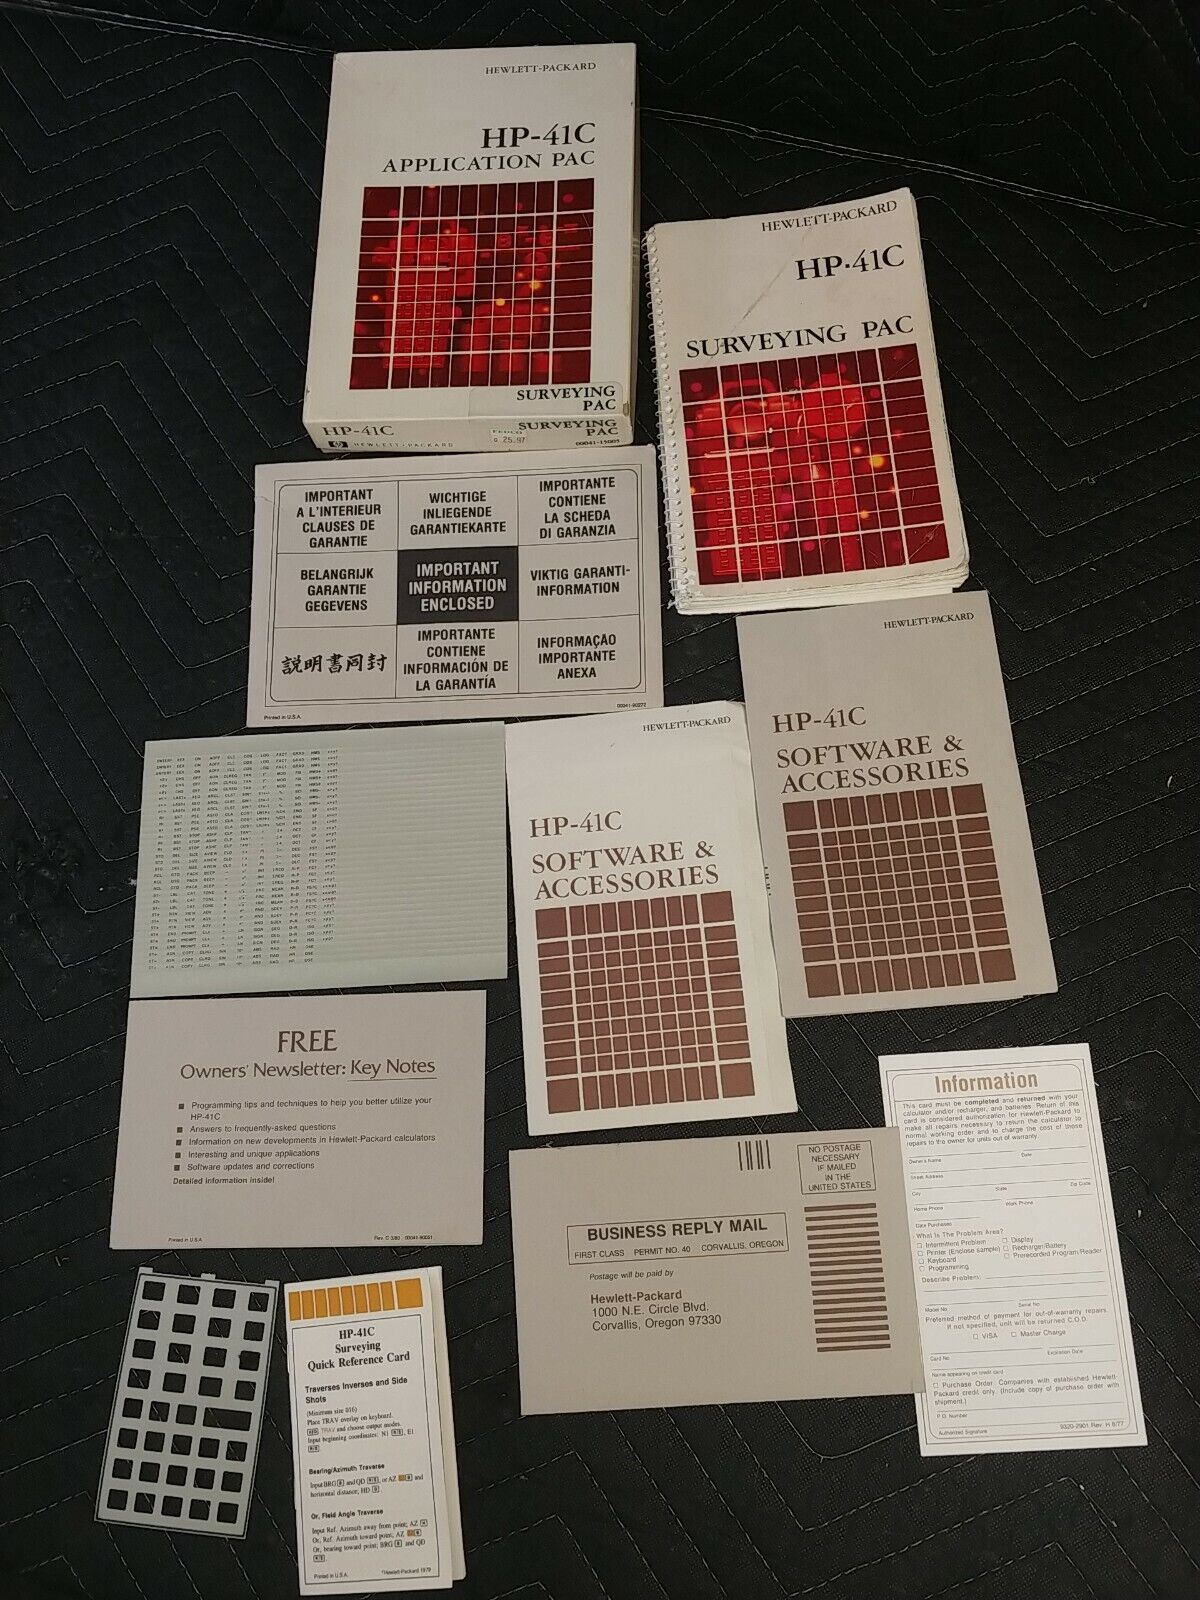 Hewlett-Packard HP-41C Application Pac / Surveying Pac Box, Manual & Papers Only